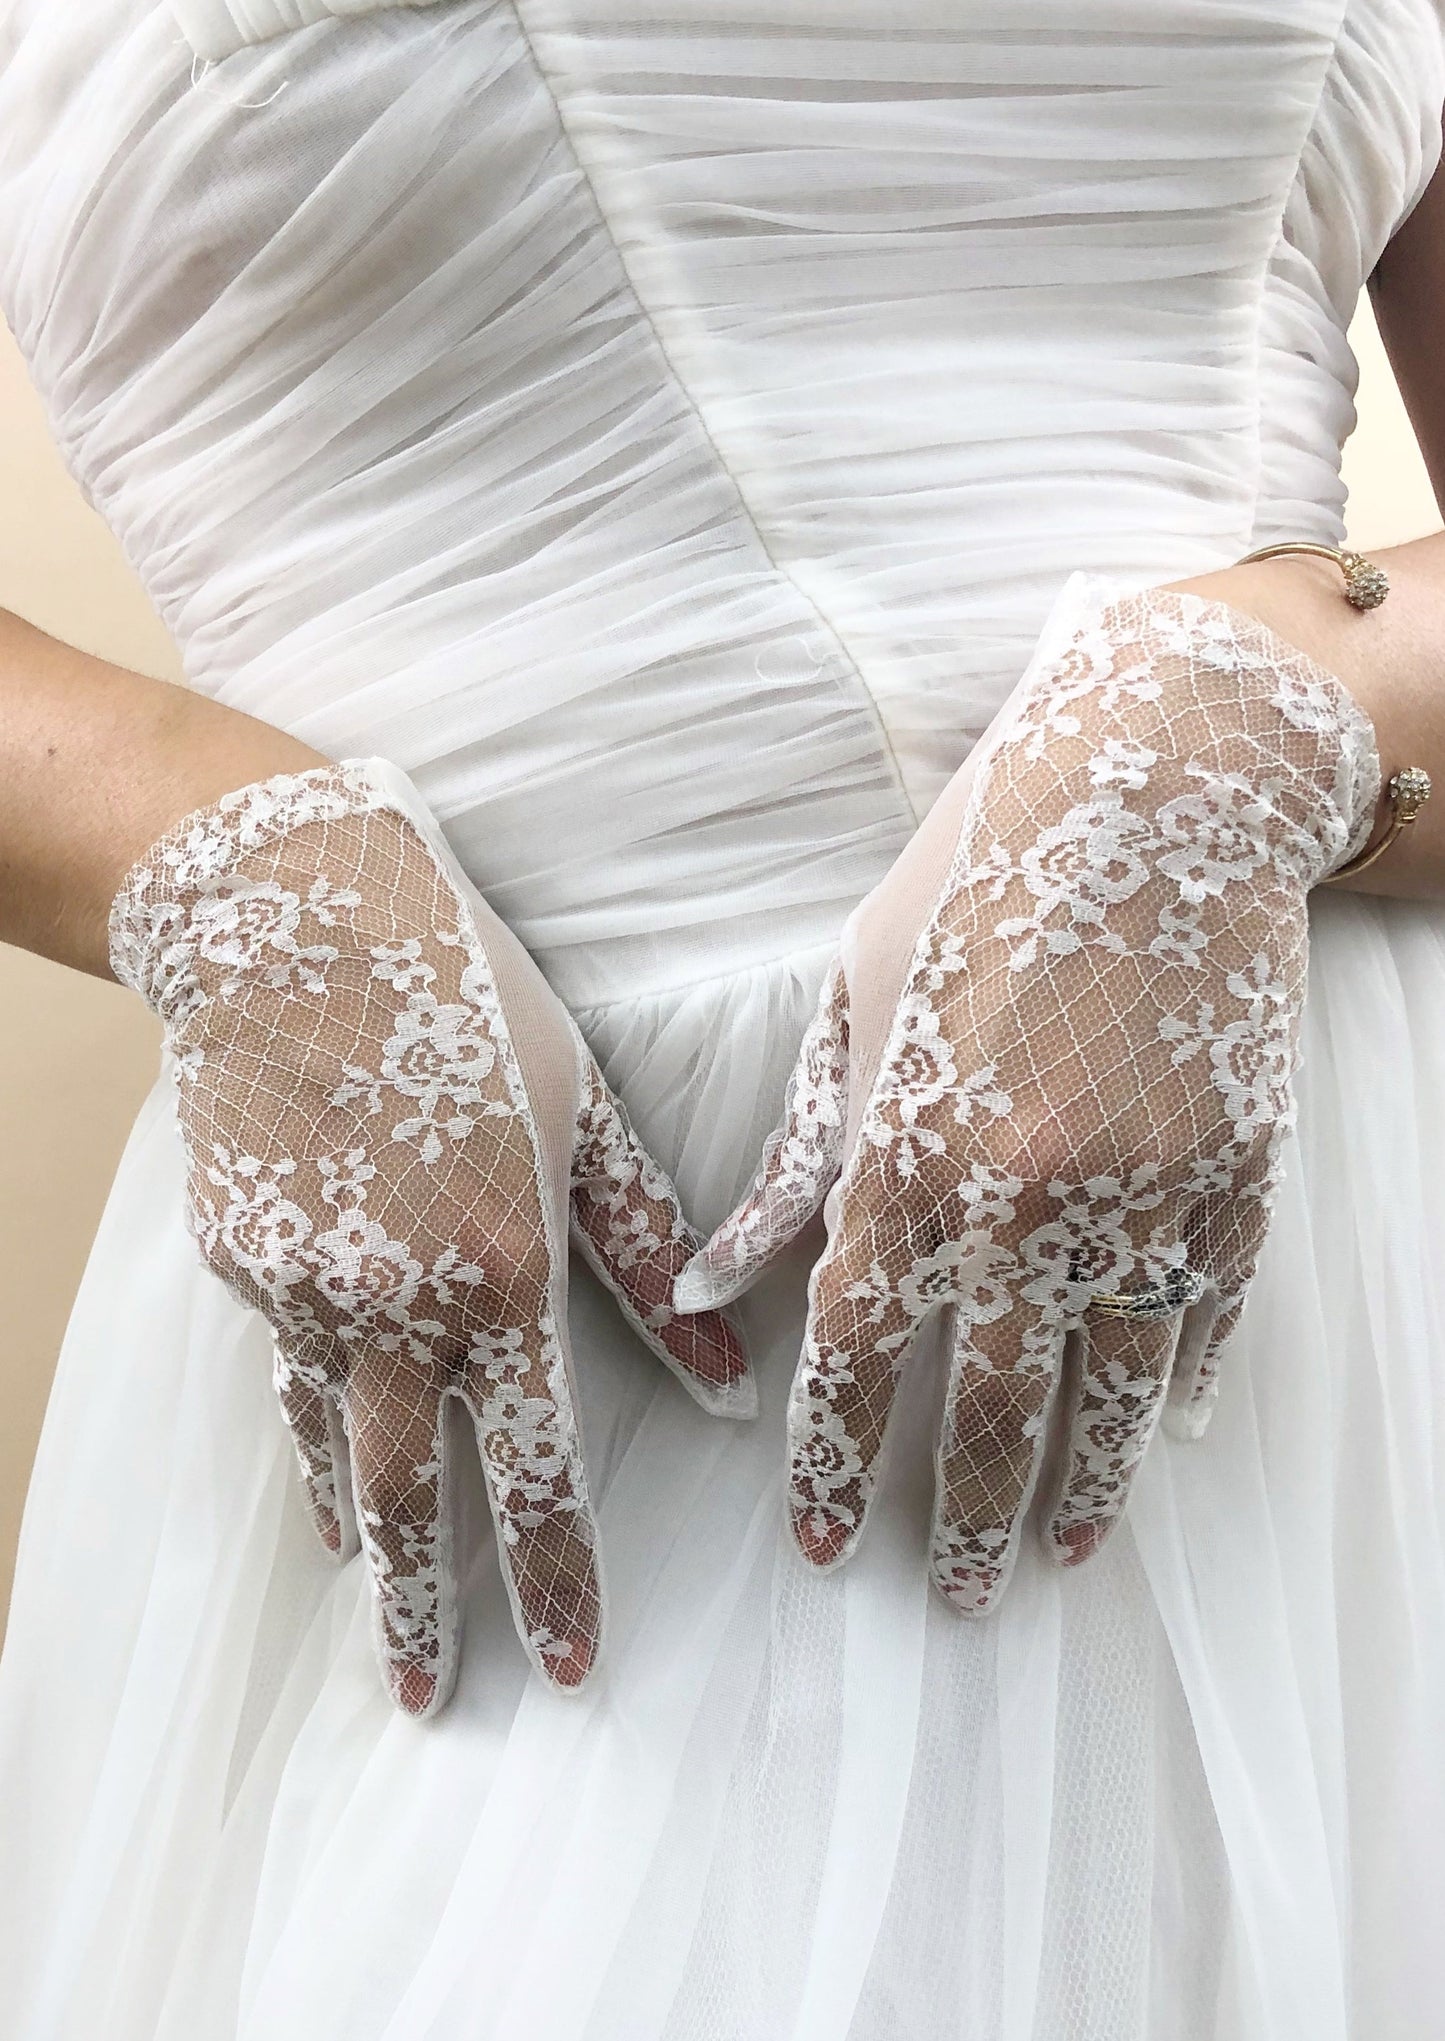 Zoomed in photo of sheer gloves on top of the white chiffon dress